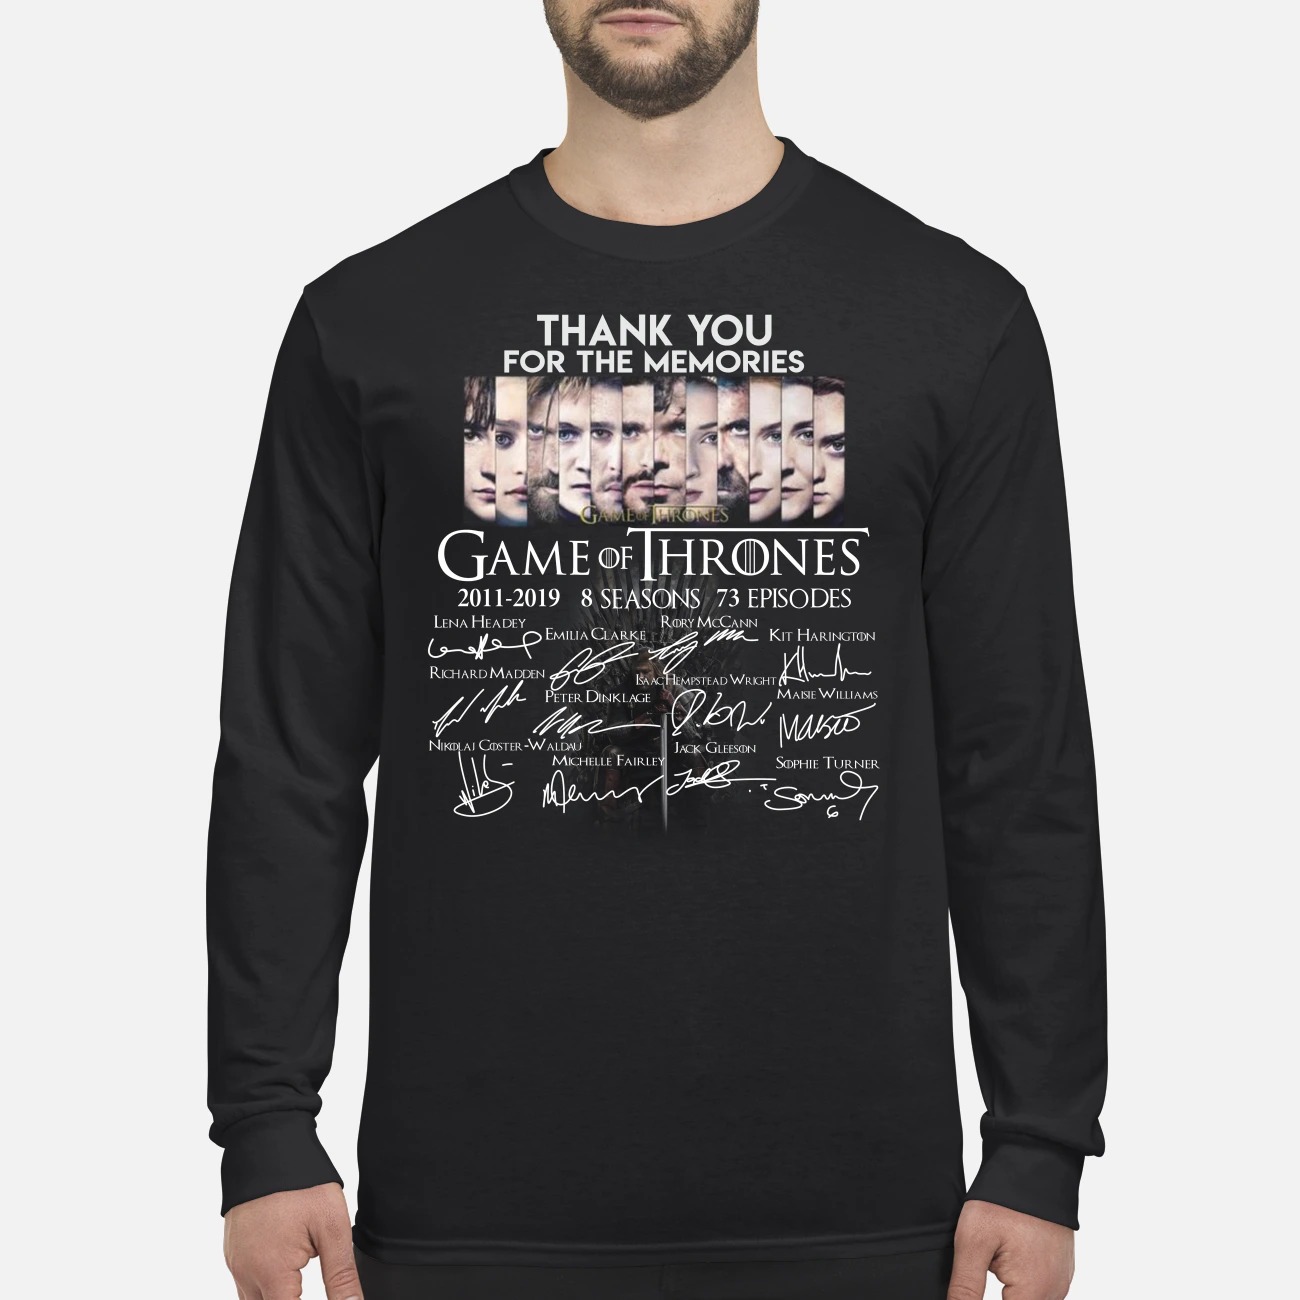 Thank you for the memories Game of Thrones men's long sleeved shirt